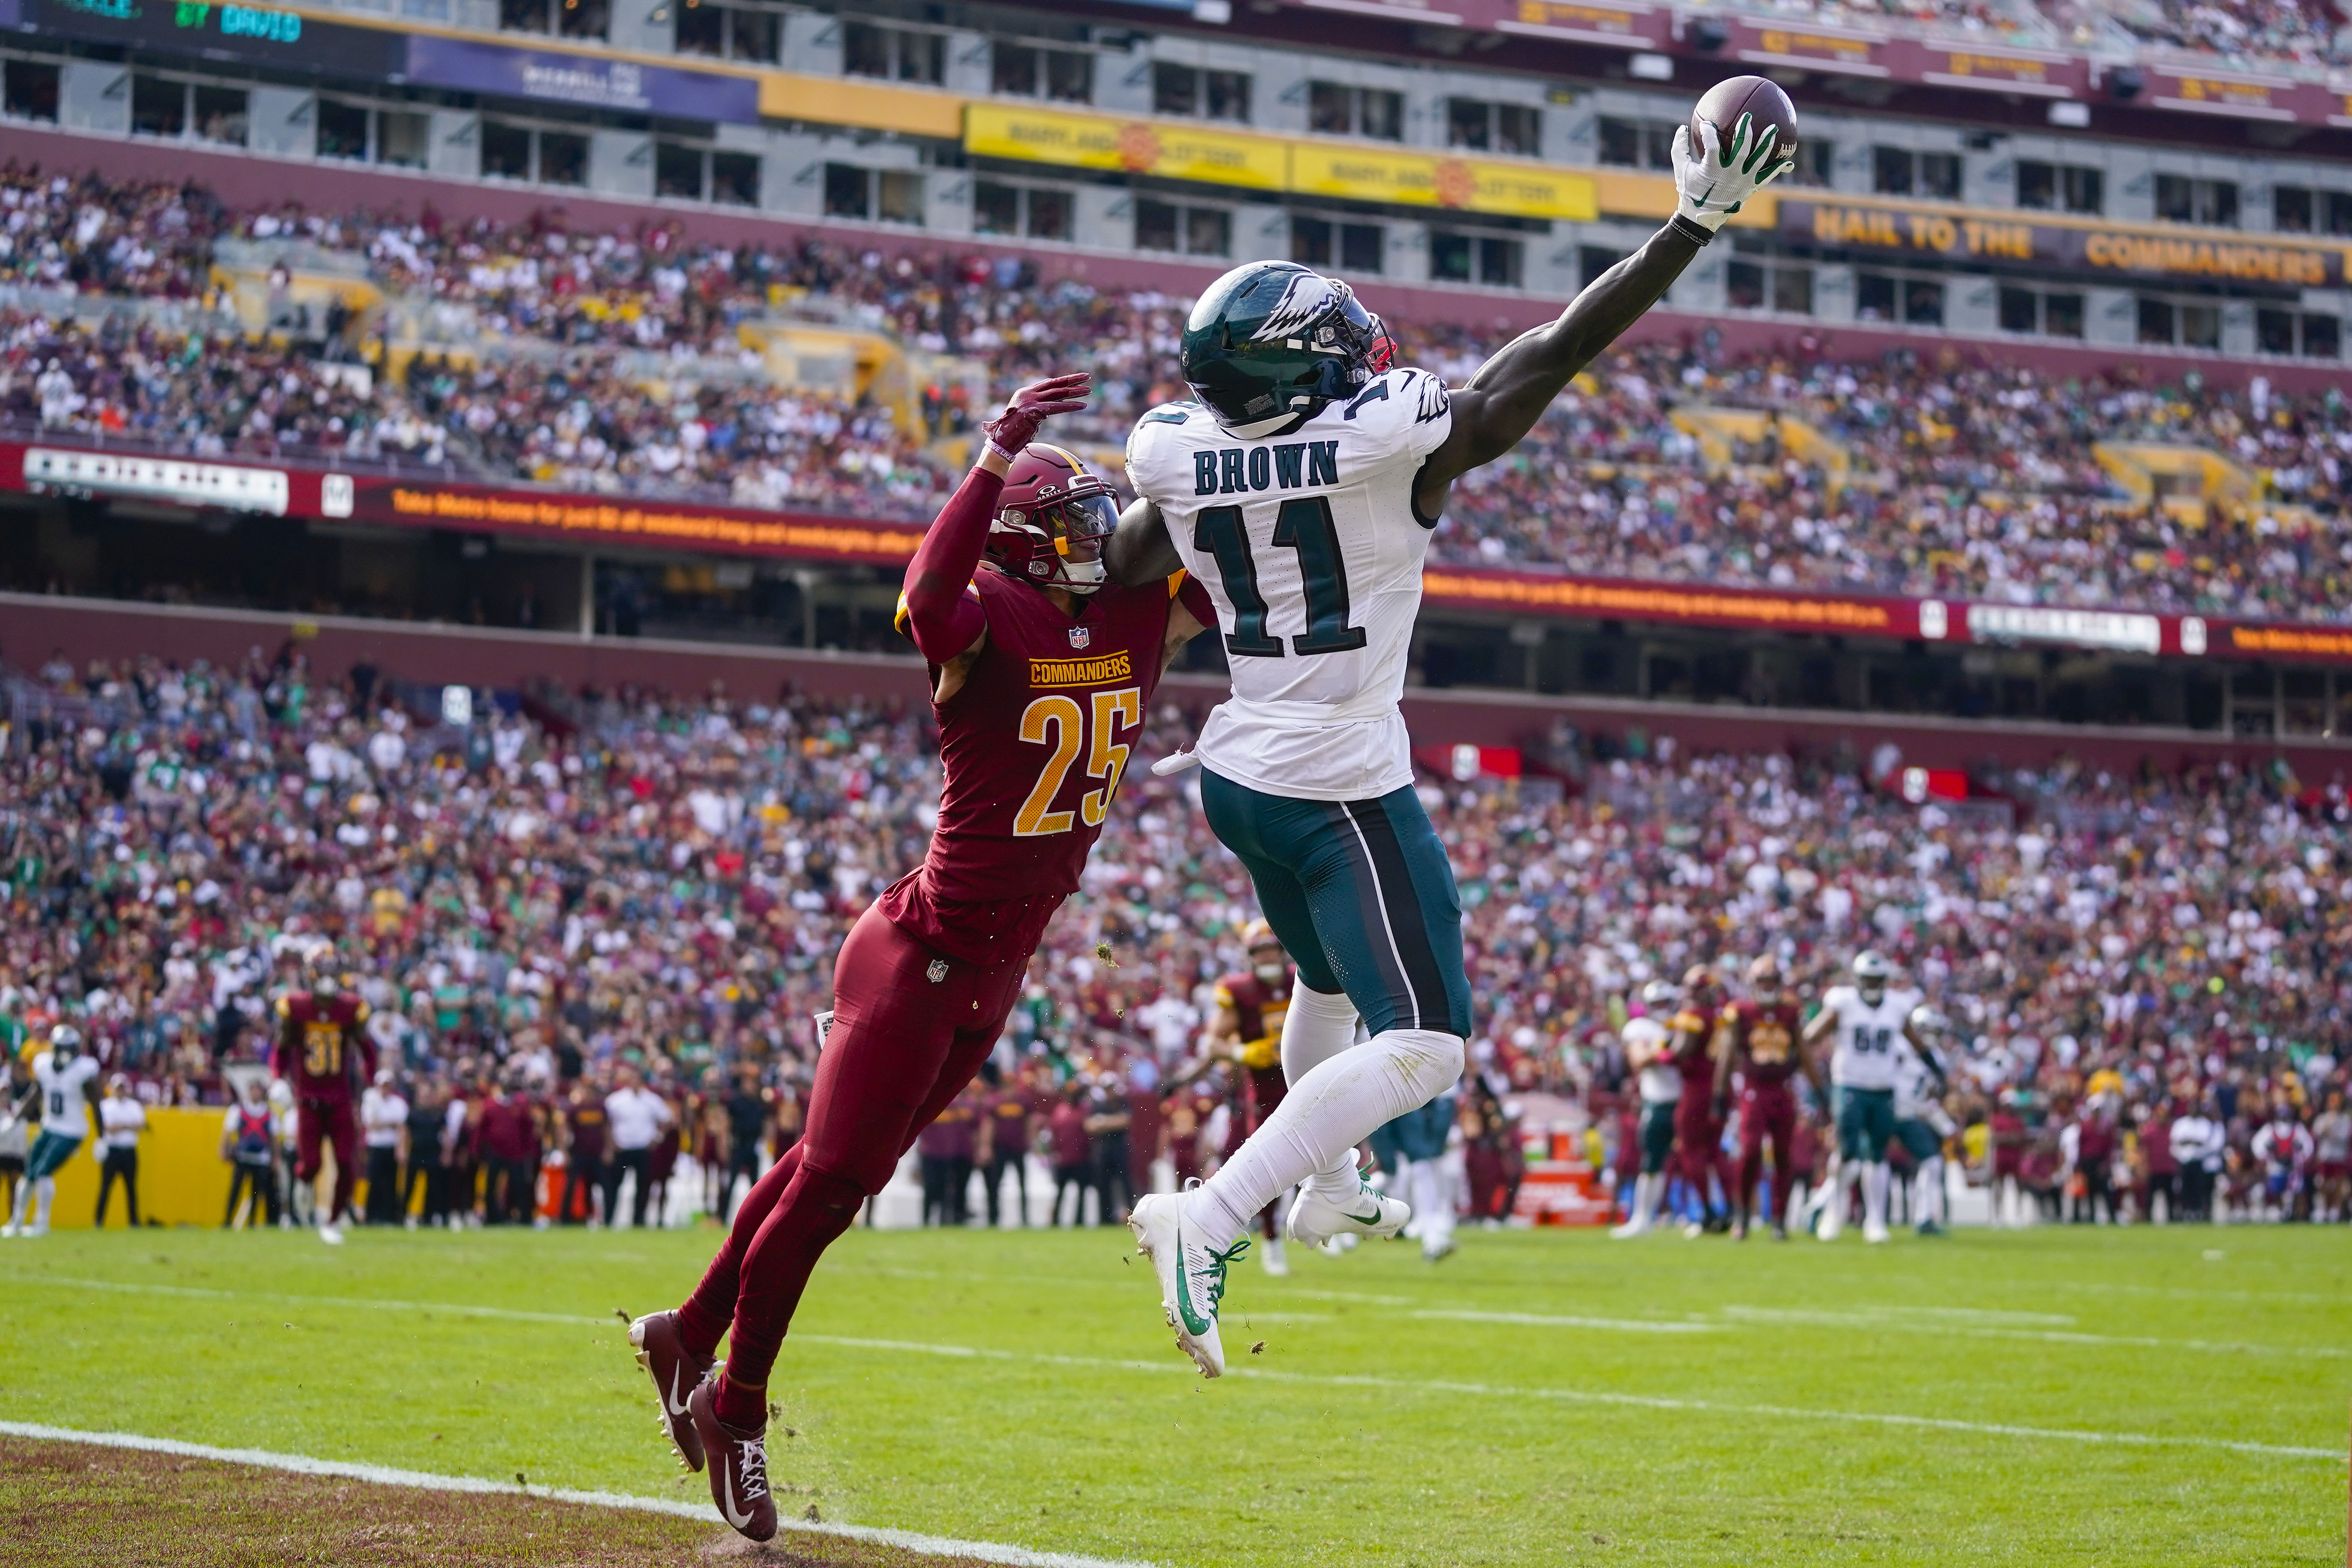 Cowboys vs. Eagles Livestream: How to Watch NFL Week 9 Online Today - CNET